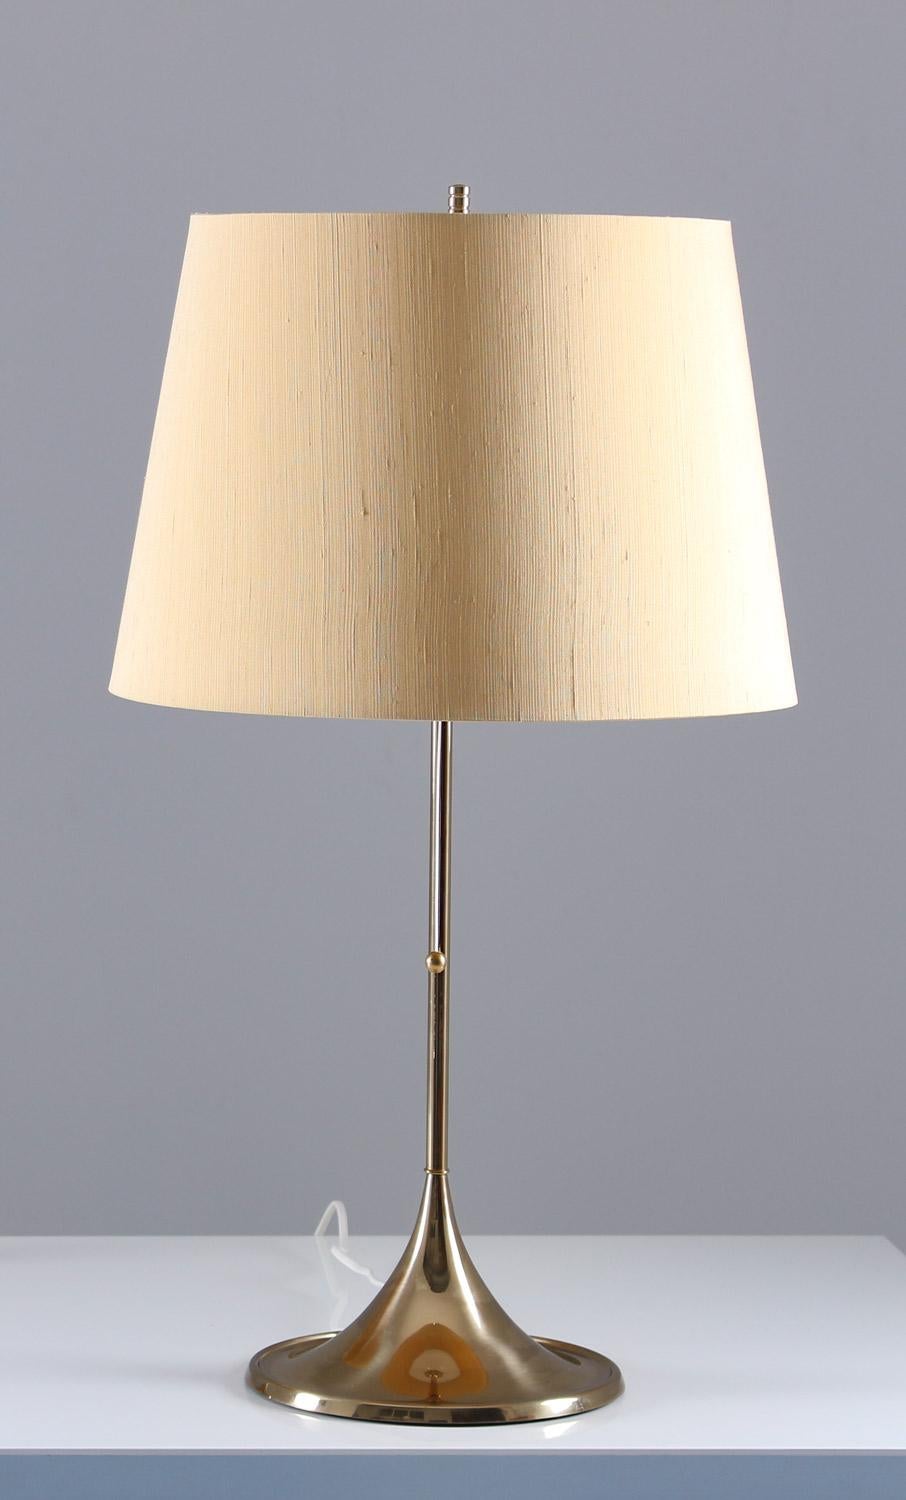 Midcentury table lamps in brass model B-024 by Alf Svensson and Yngvar Sandström for Bergboms, Sweden
The lamps are made of solid brass with a trumpet-shaped foot. The lamps comes with original shades with plexi-diffuser on top.
Condition: Very